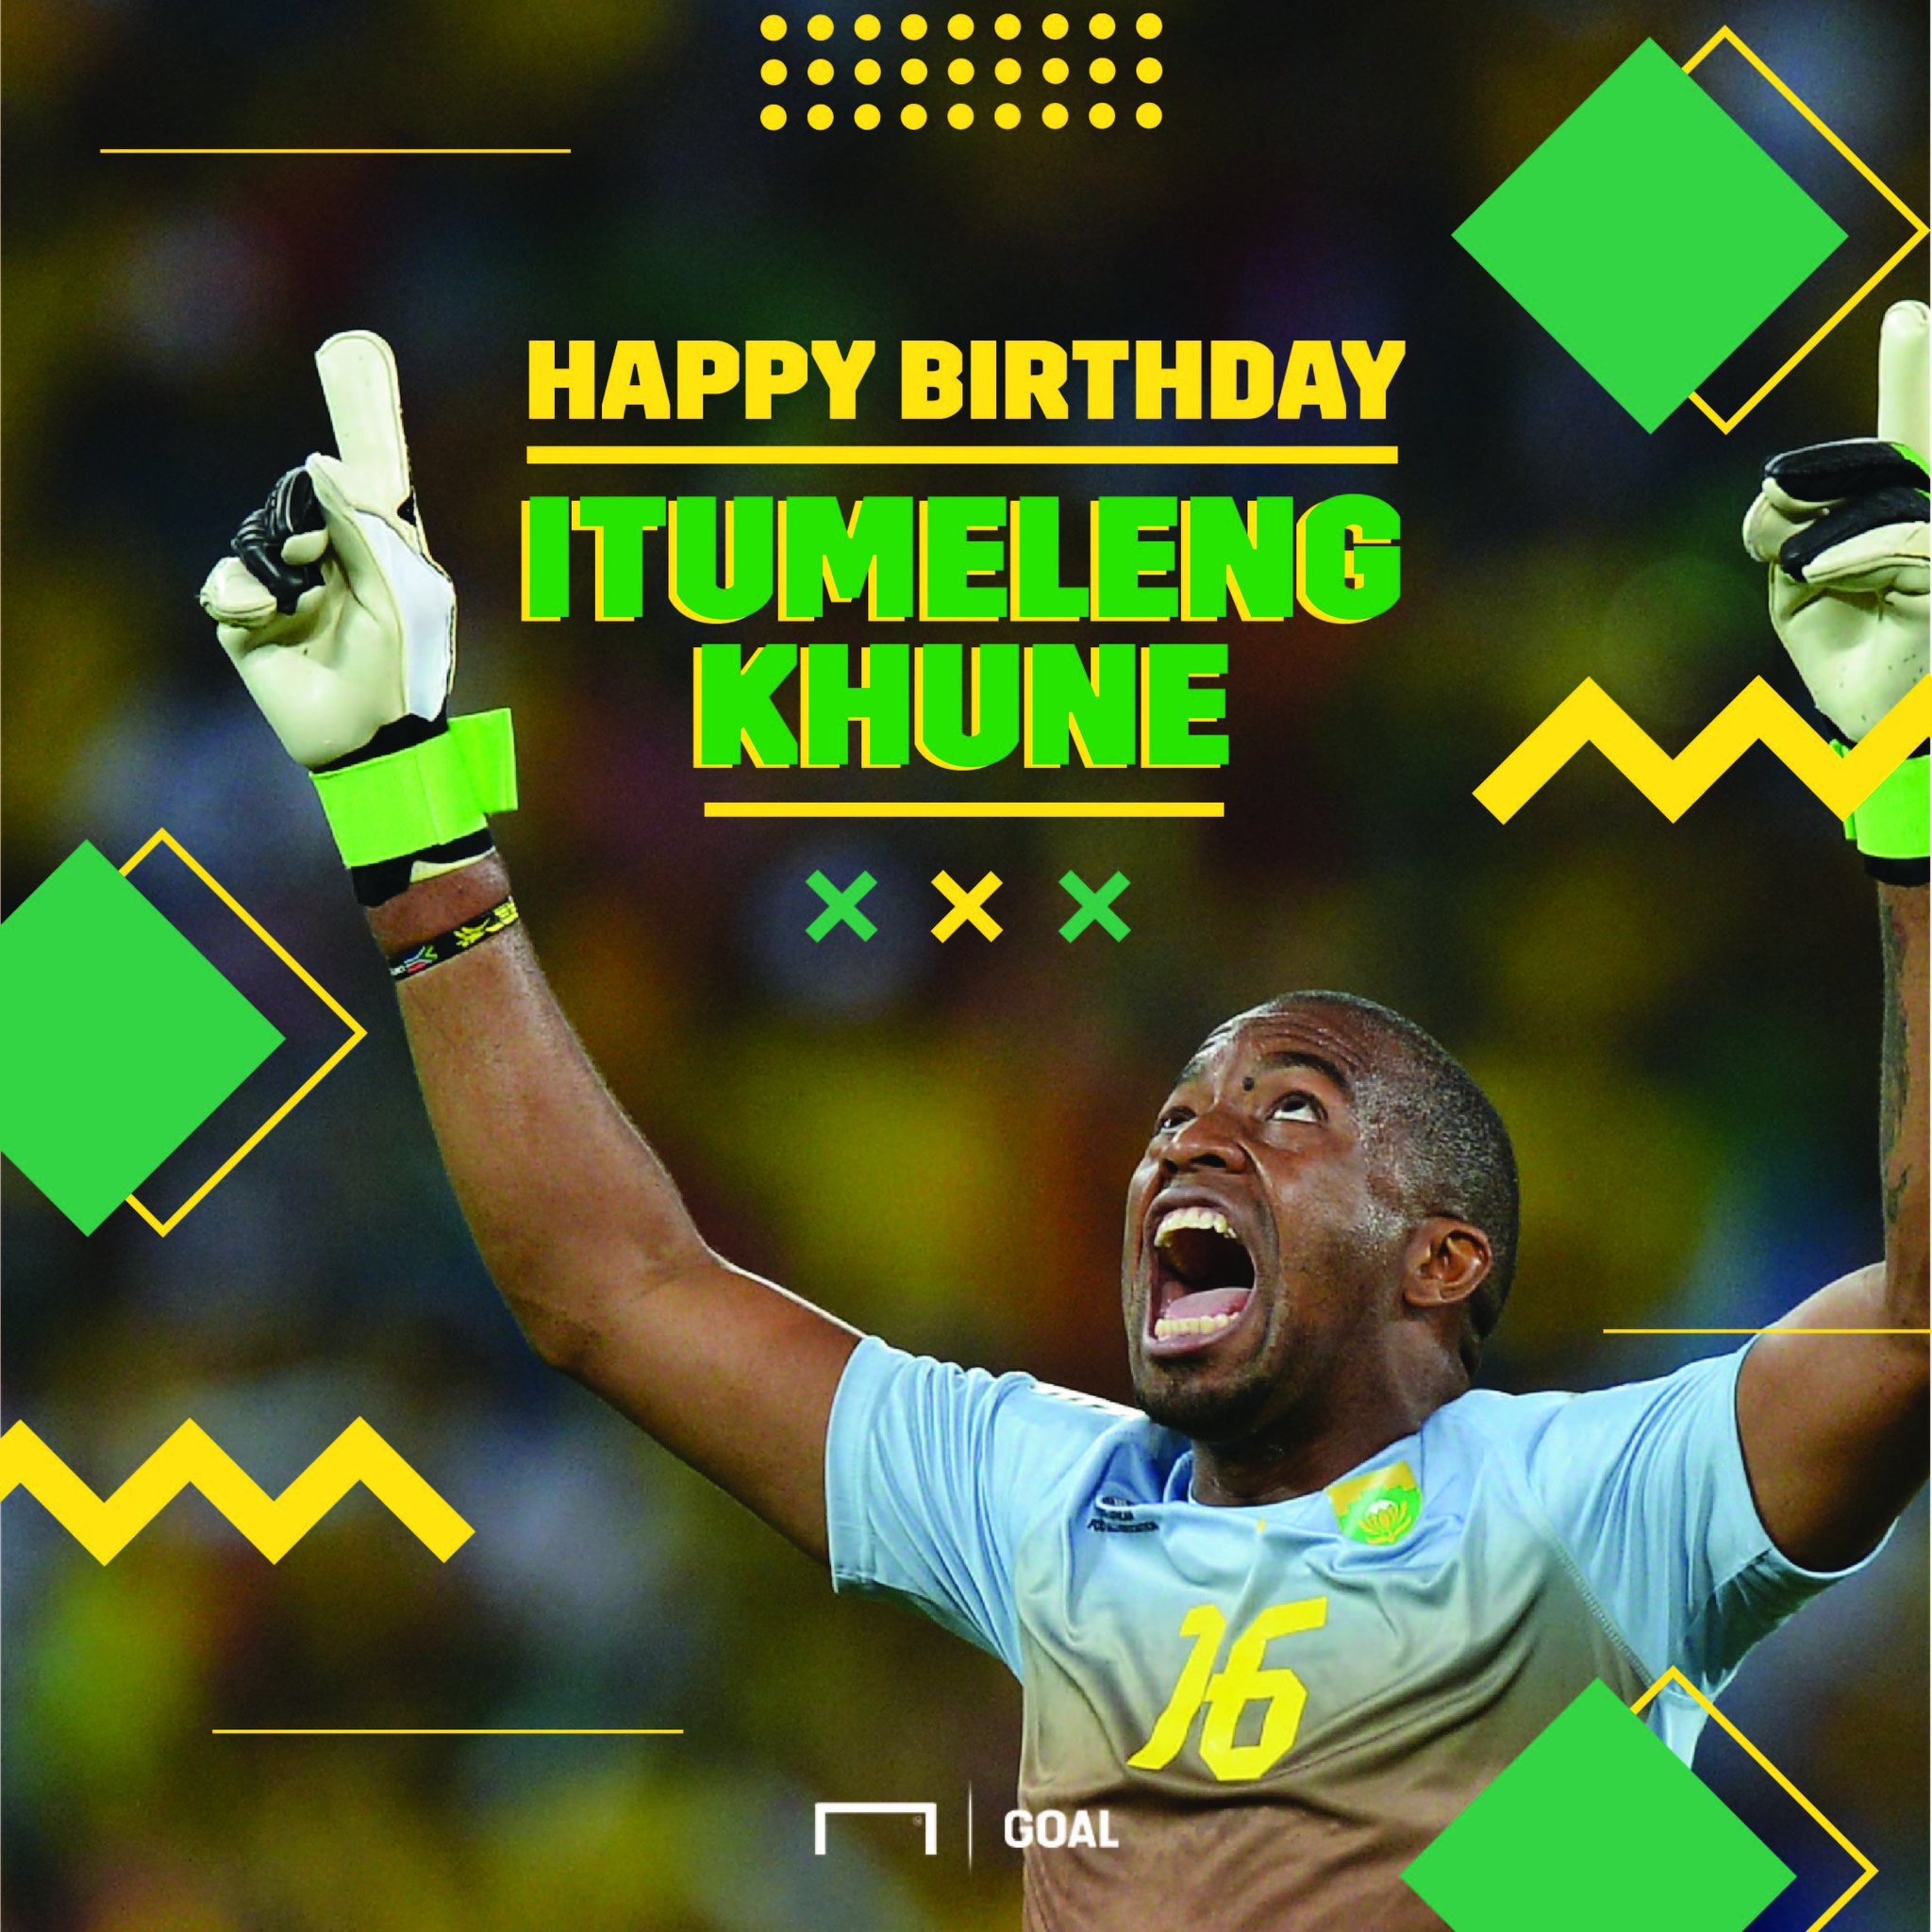 Join us in wishing Itumeleng Khune a very happy birthday! 